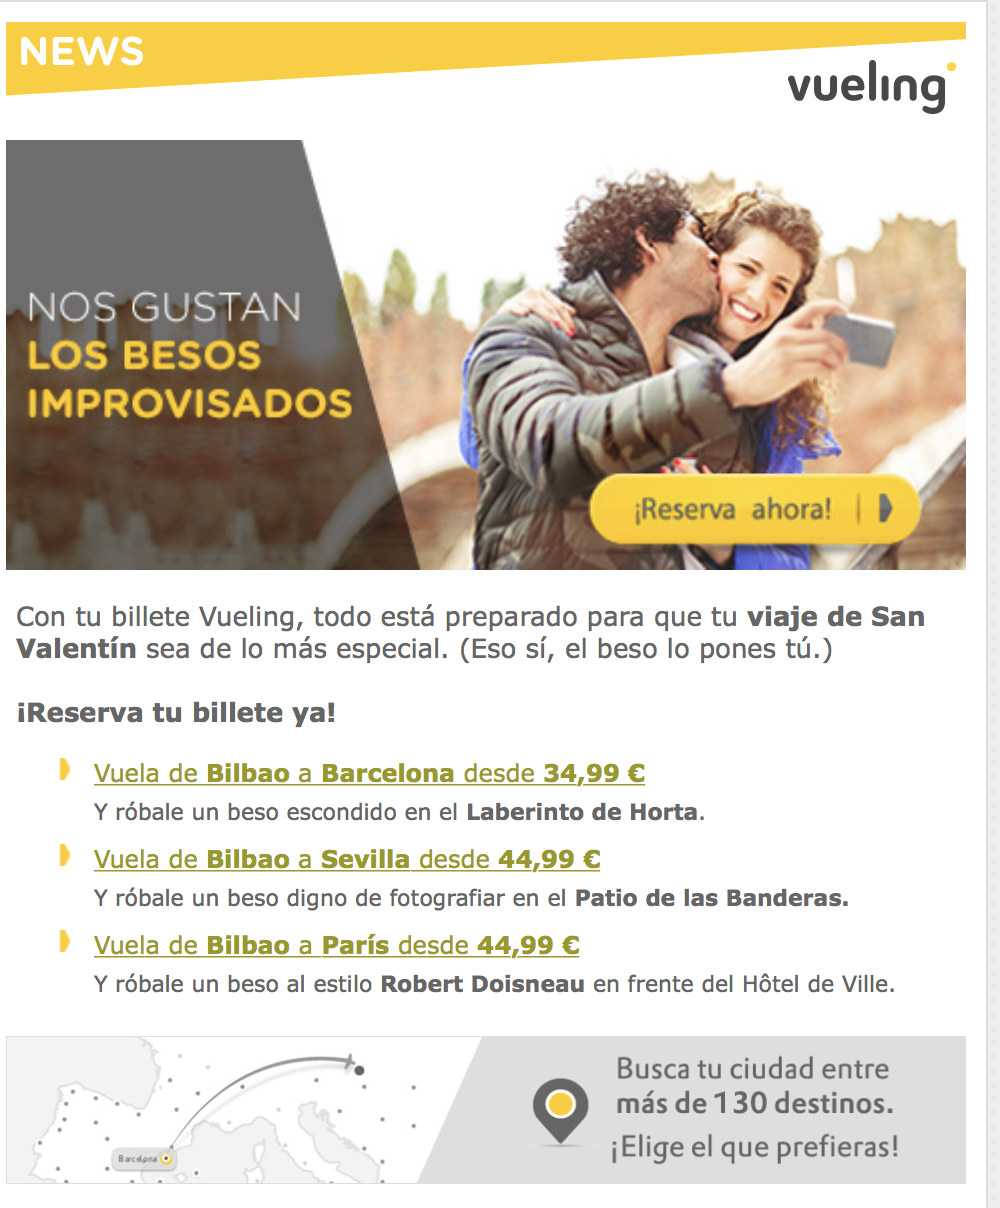 email promocional